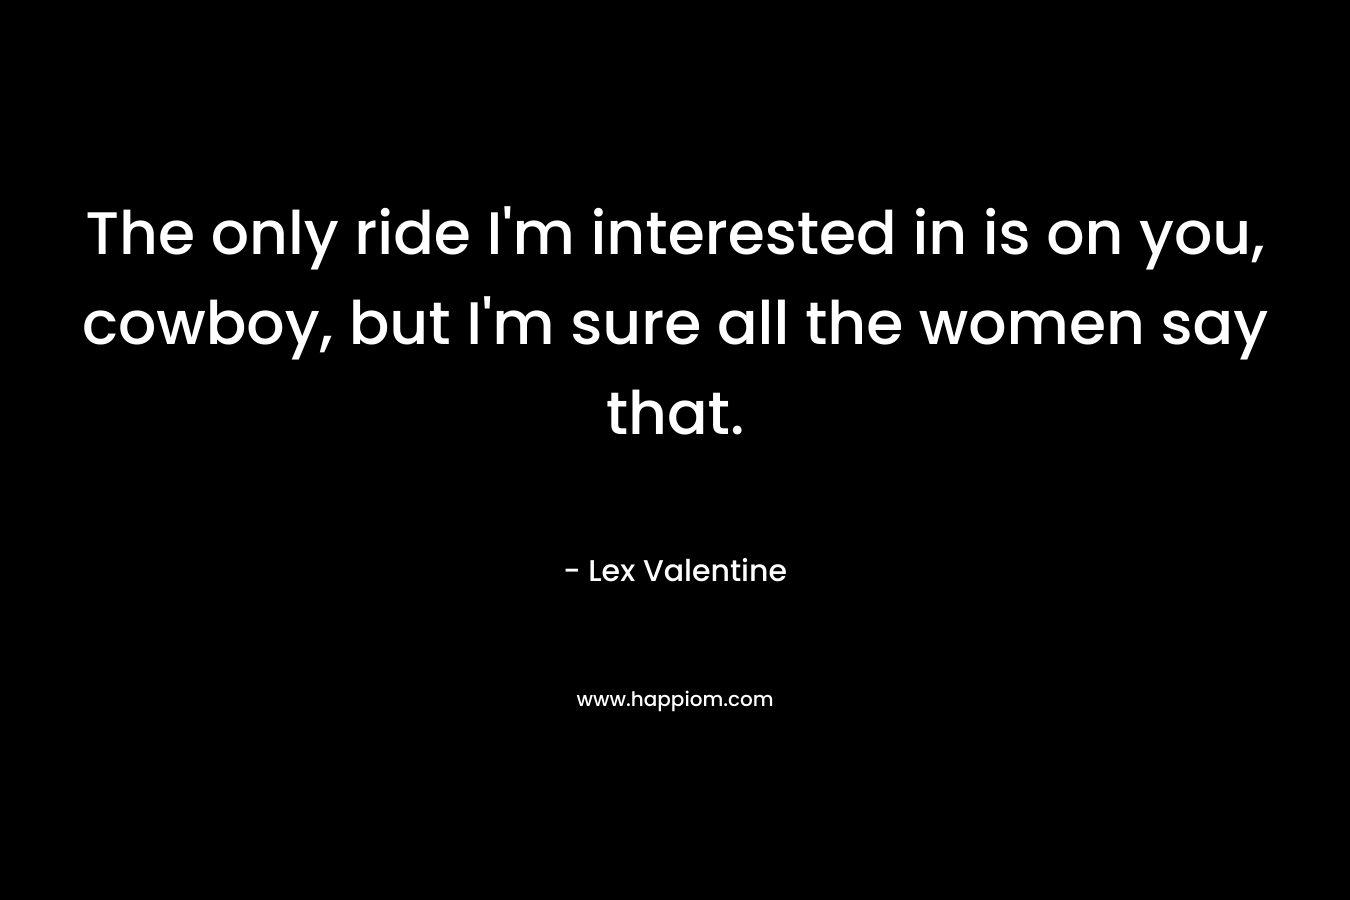 The only ride I’m interested in is on you, cowboy, but I’m sure all the women say that. – Lex Valentine